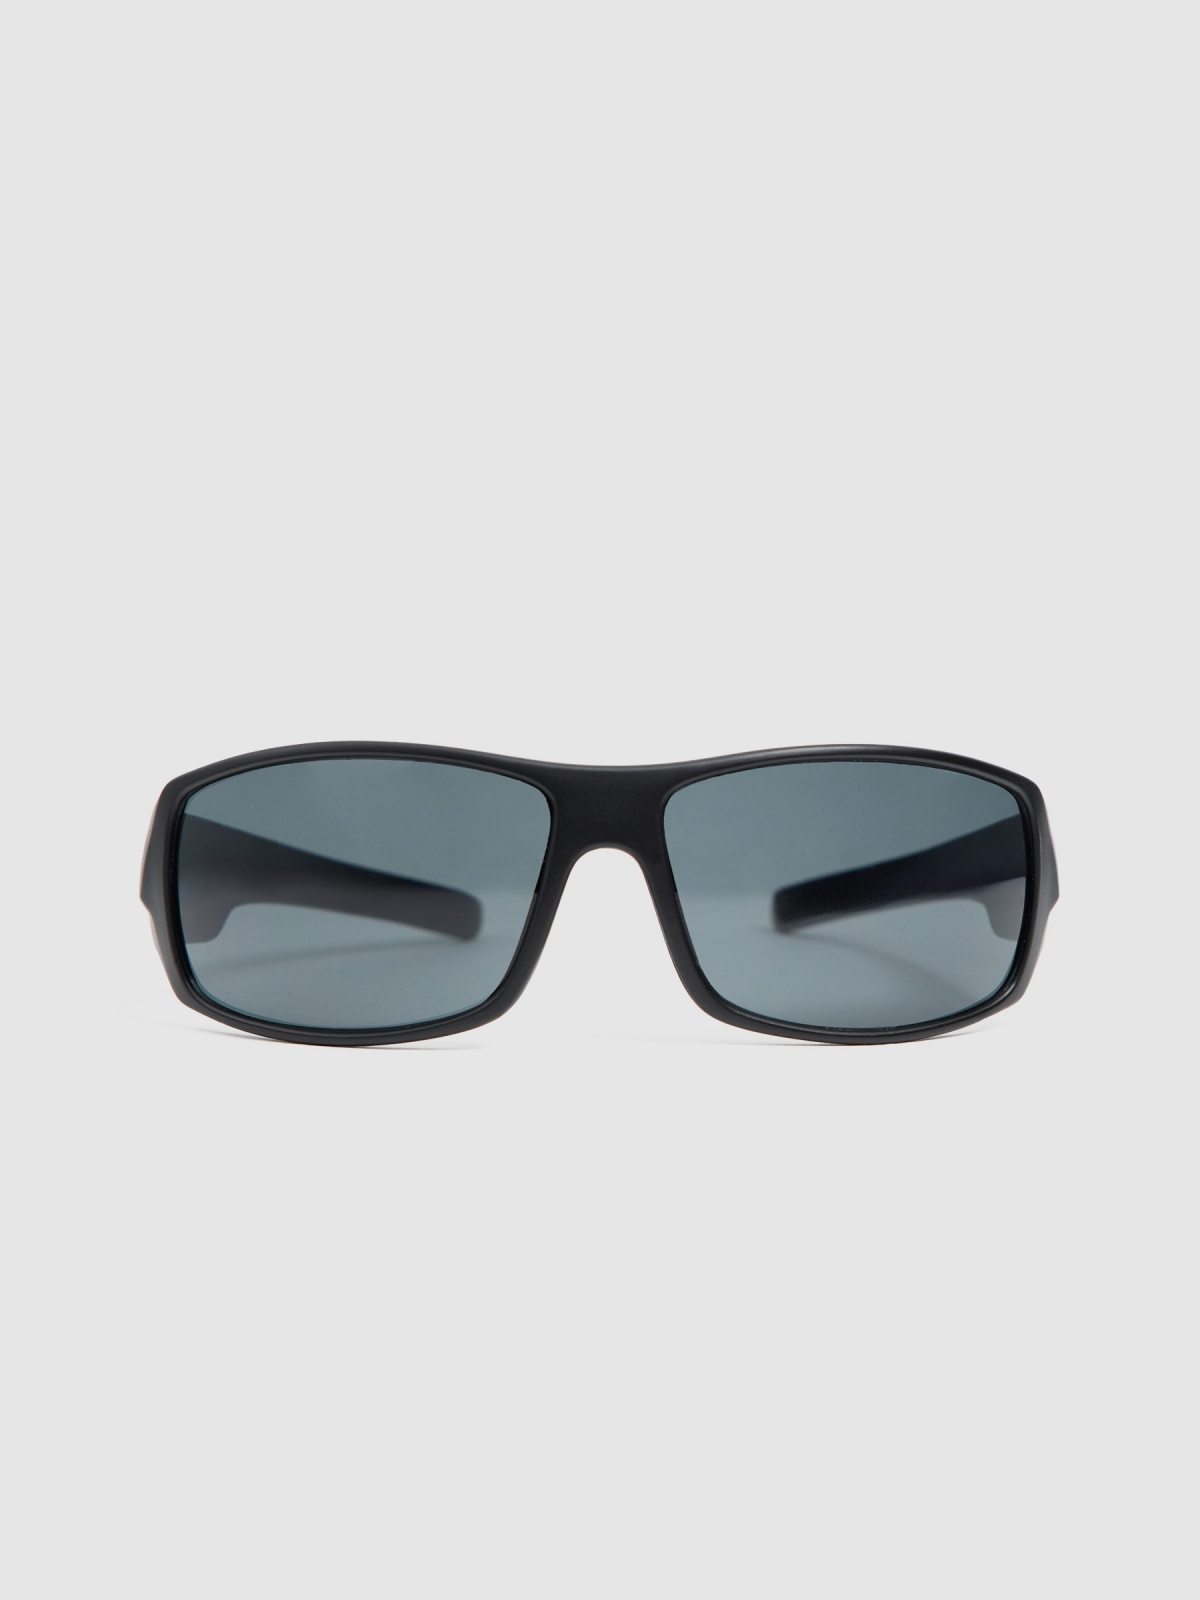 Sunglasses with frame black